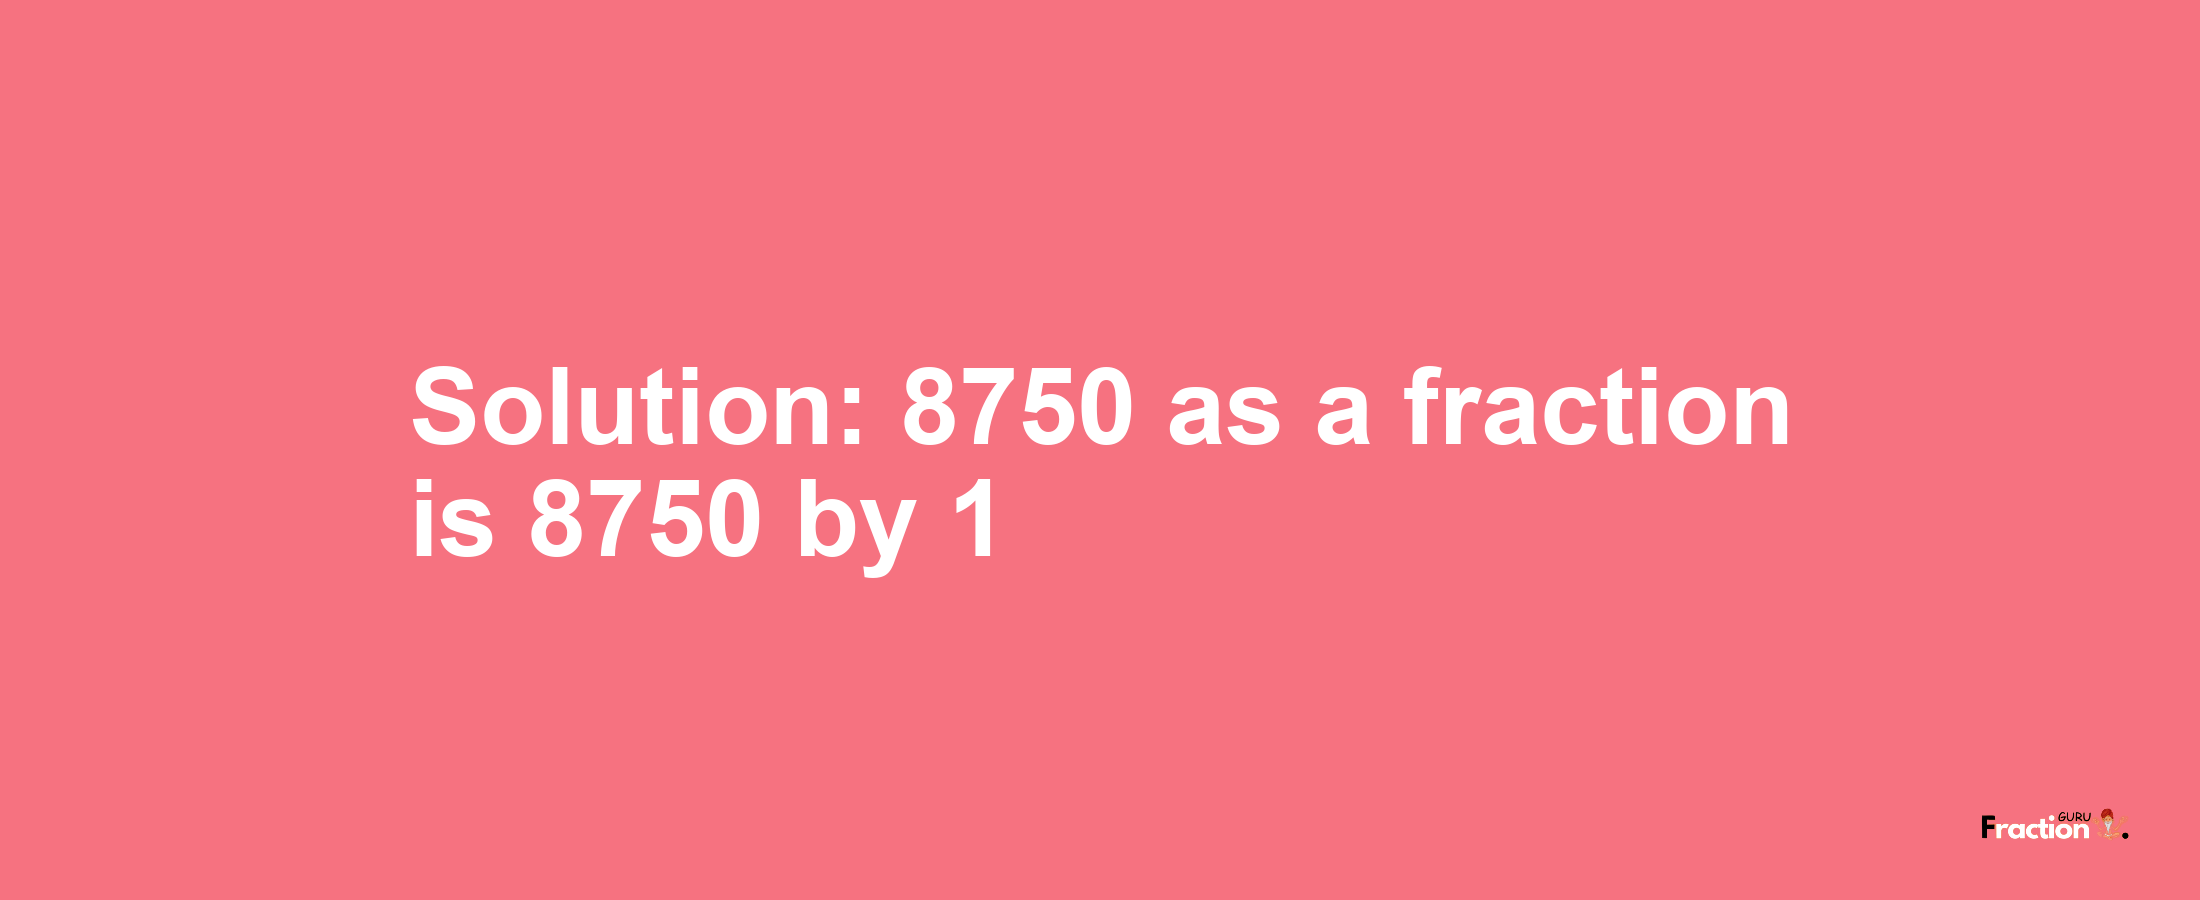 Solution:8750 as a fraction is 8750/1